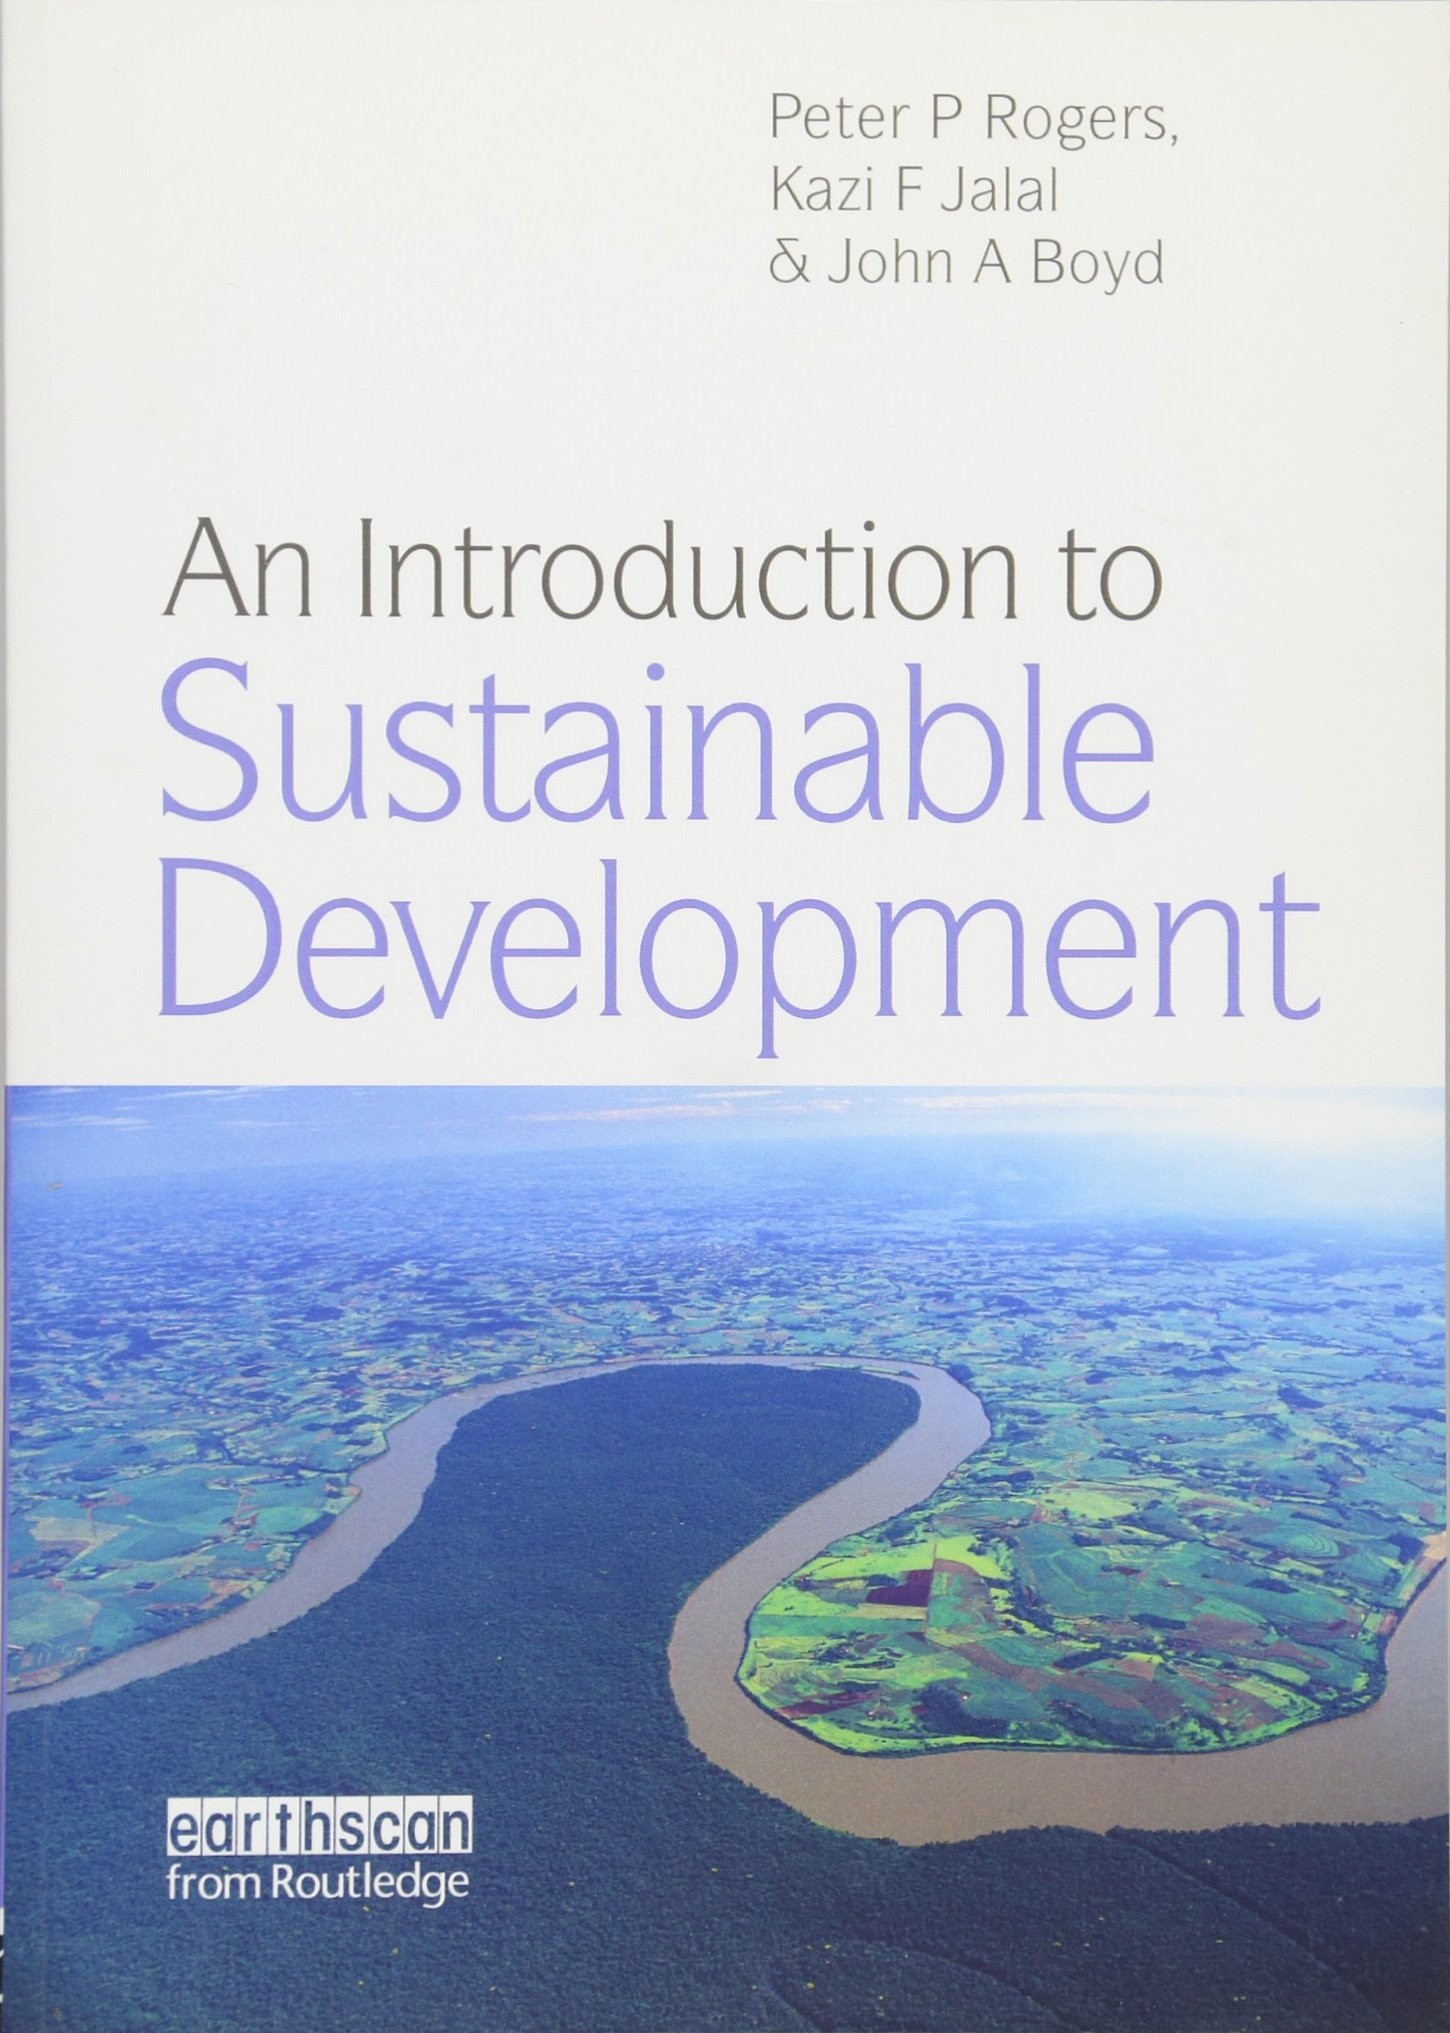 An Introduction to Sustainable Development